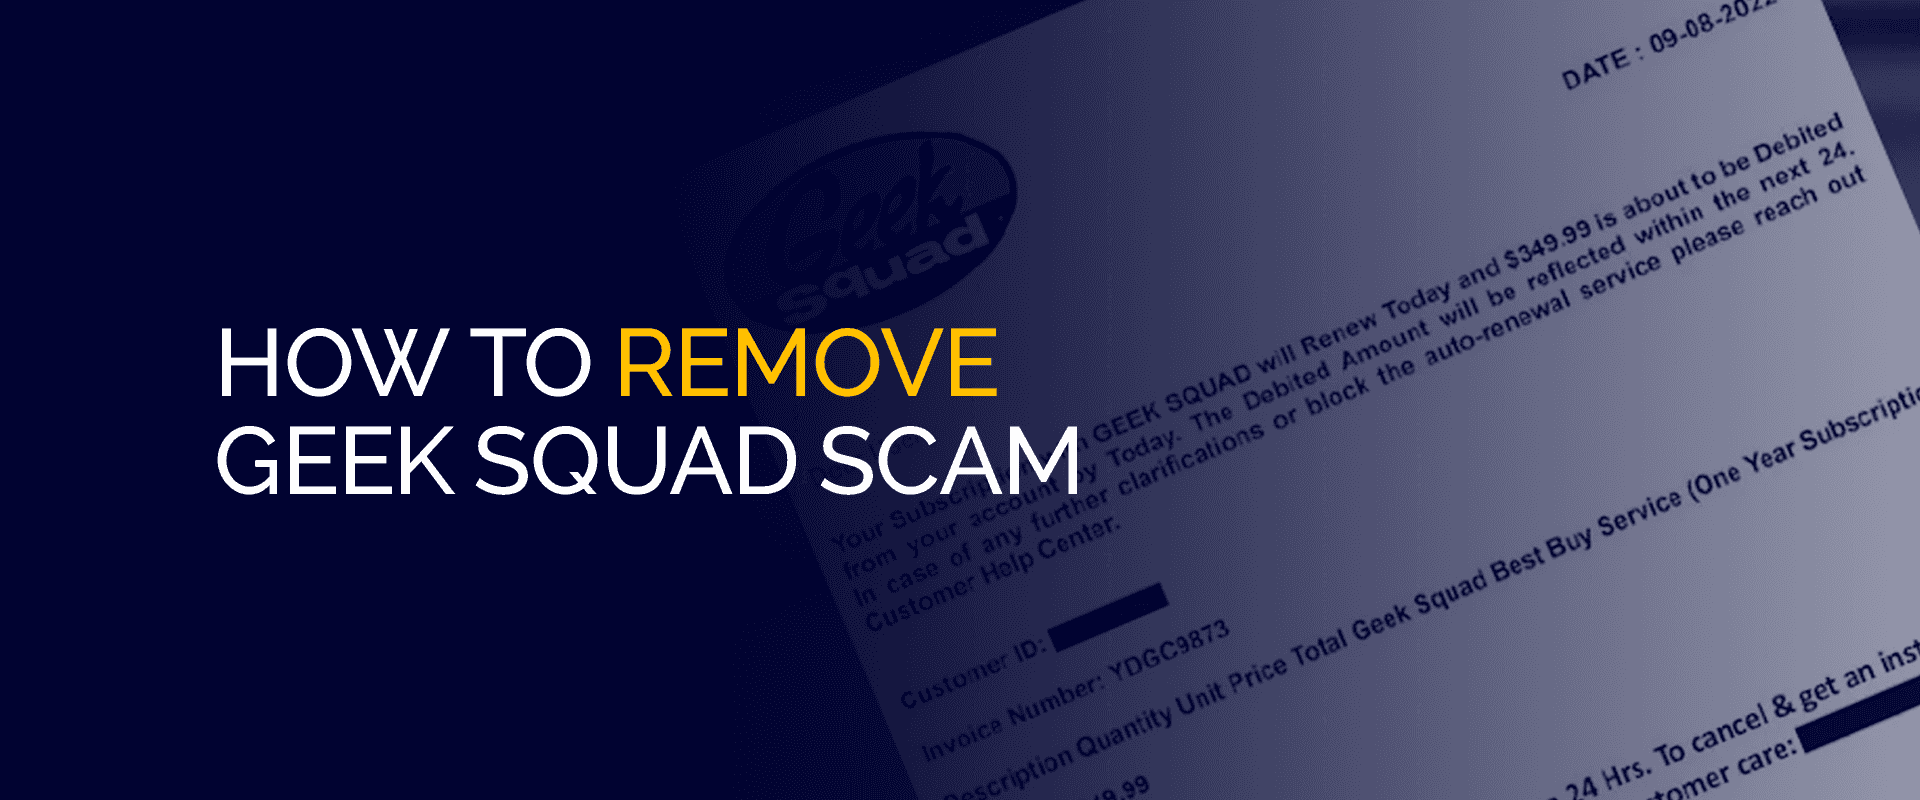 How to Remove Geek Squad Scam